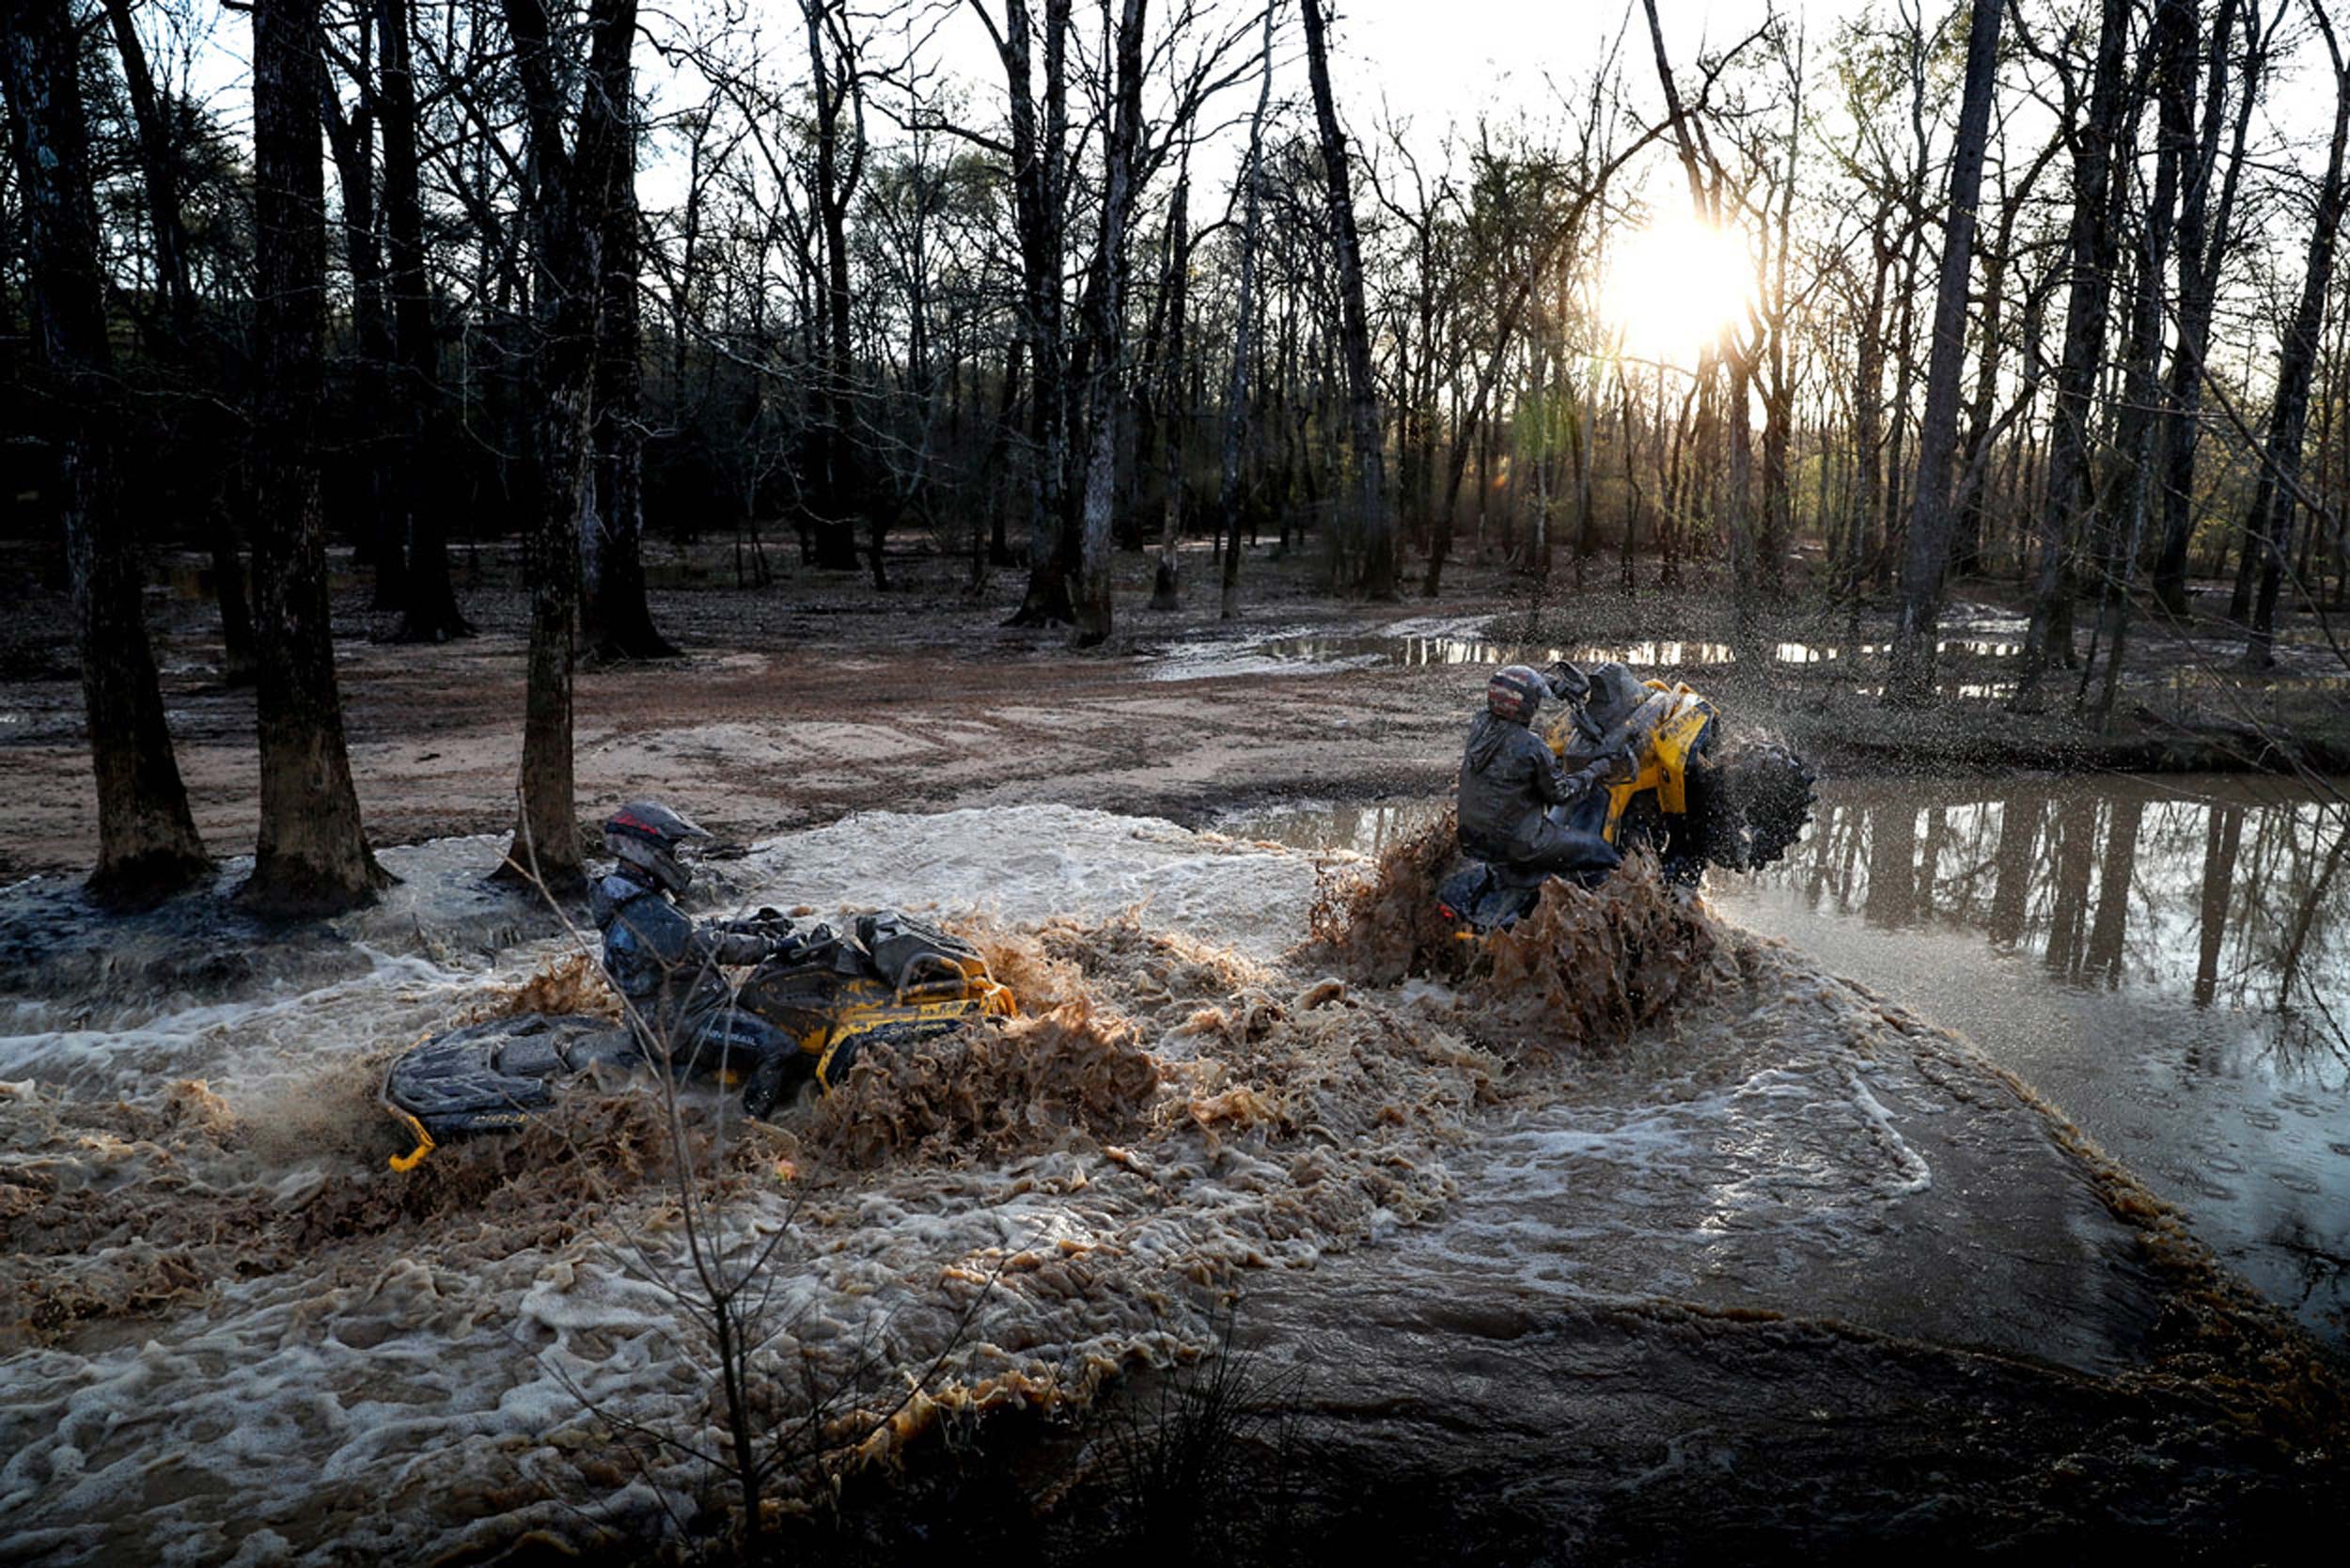 Two people riding in mud with their Can-Am Outlander X mr ATV